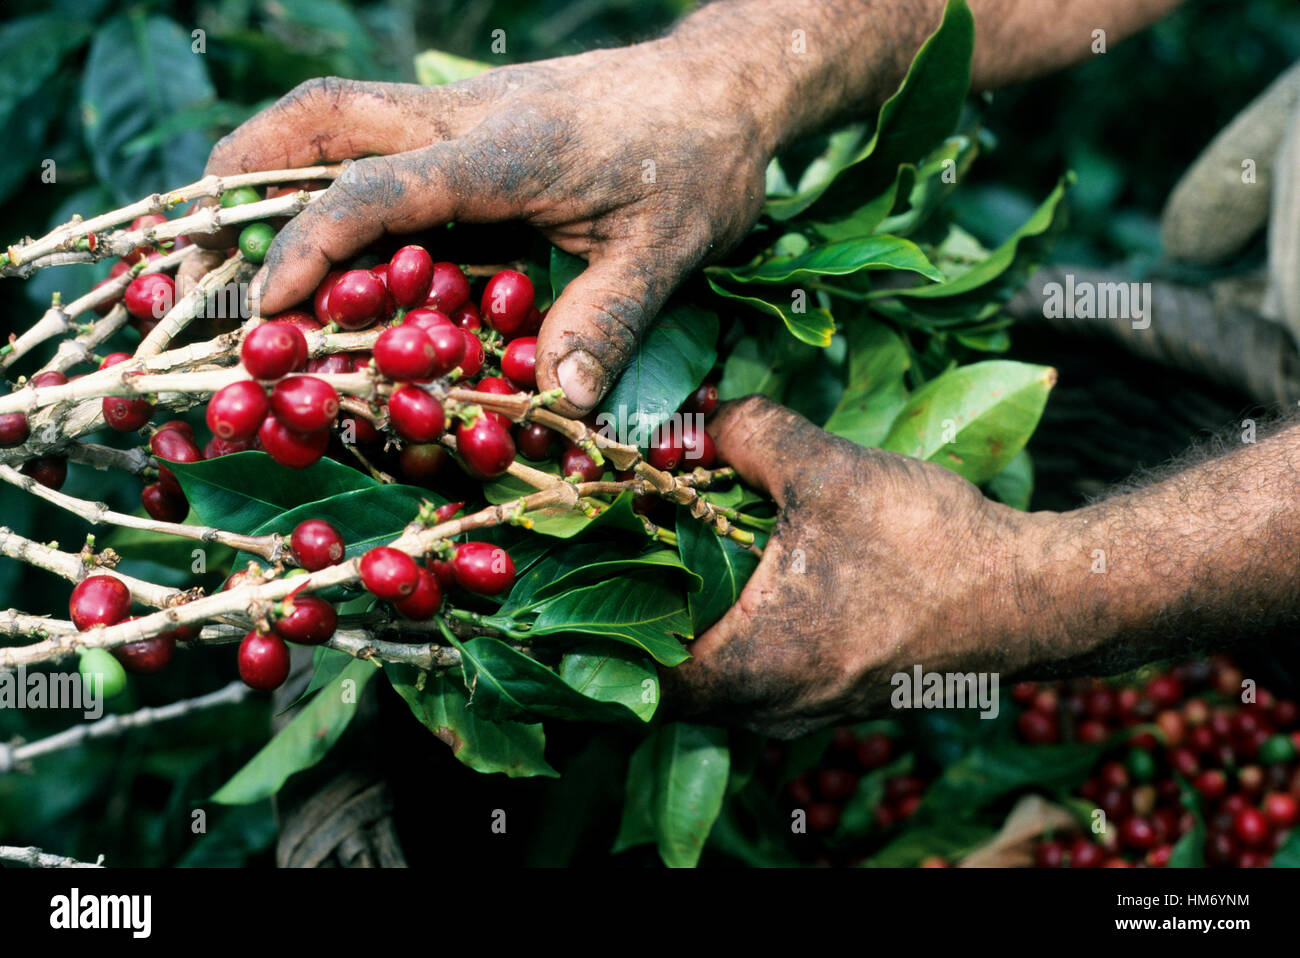 Coffee picker's hands holding coffee plant branches, Central Valley, Costa Rica Stock Photo